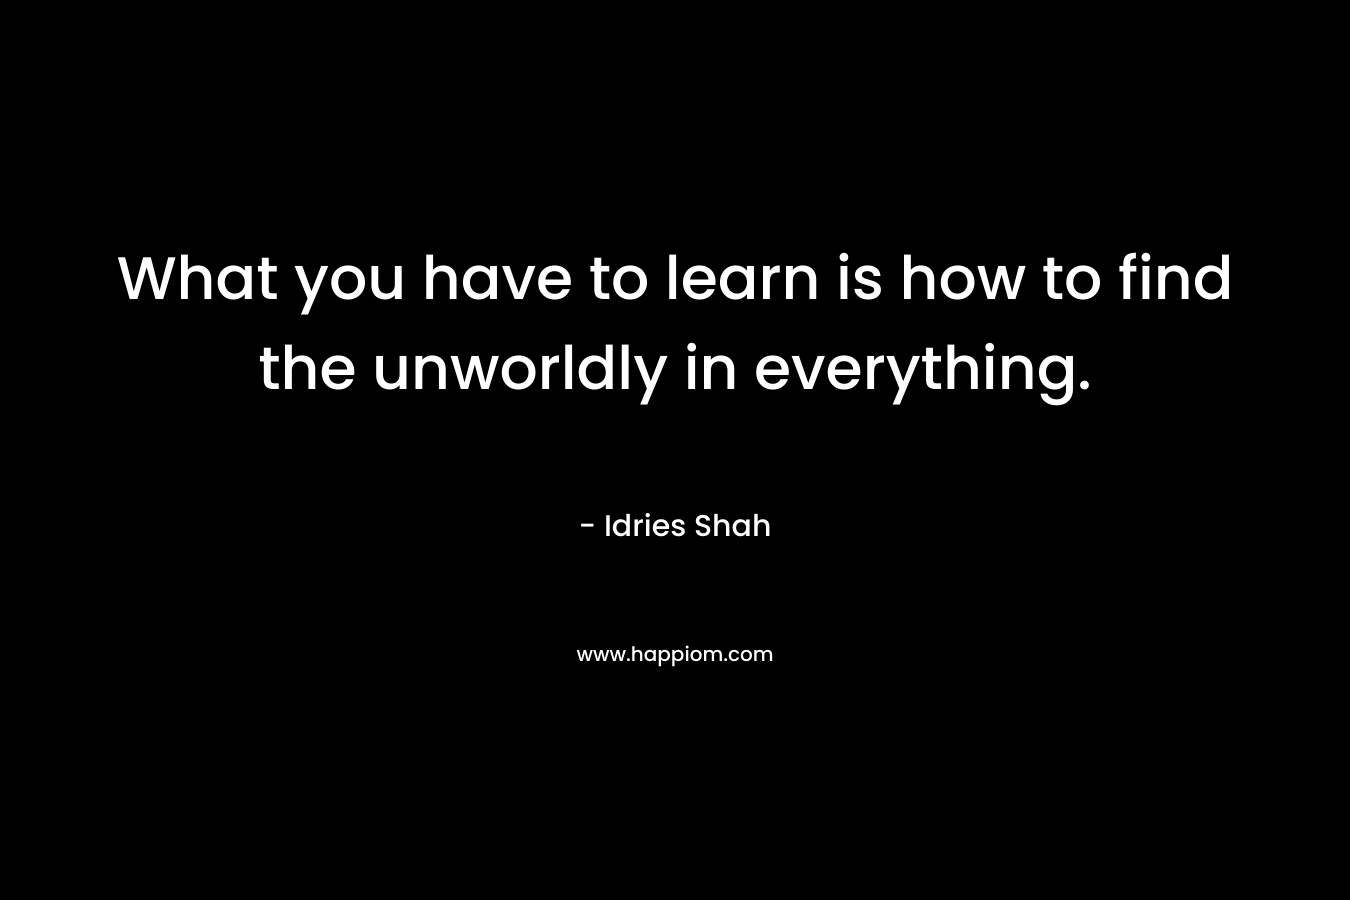 What you have to learn is how to find the unworldly in everything.